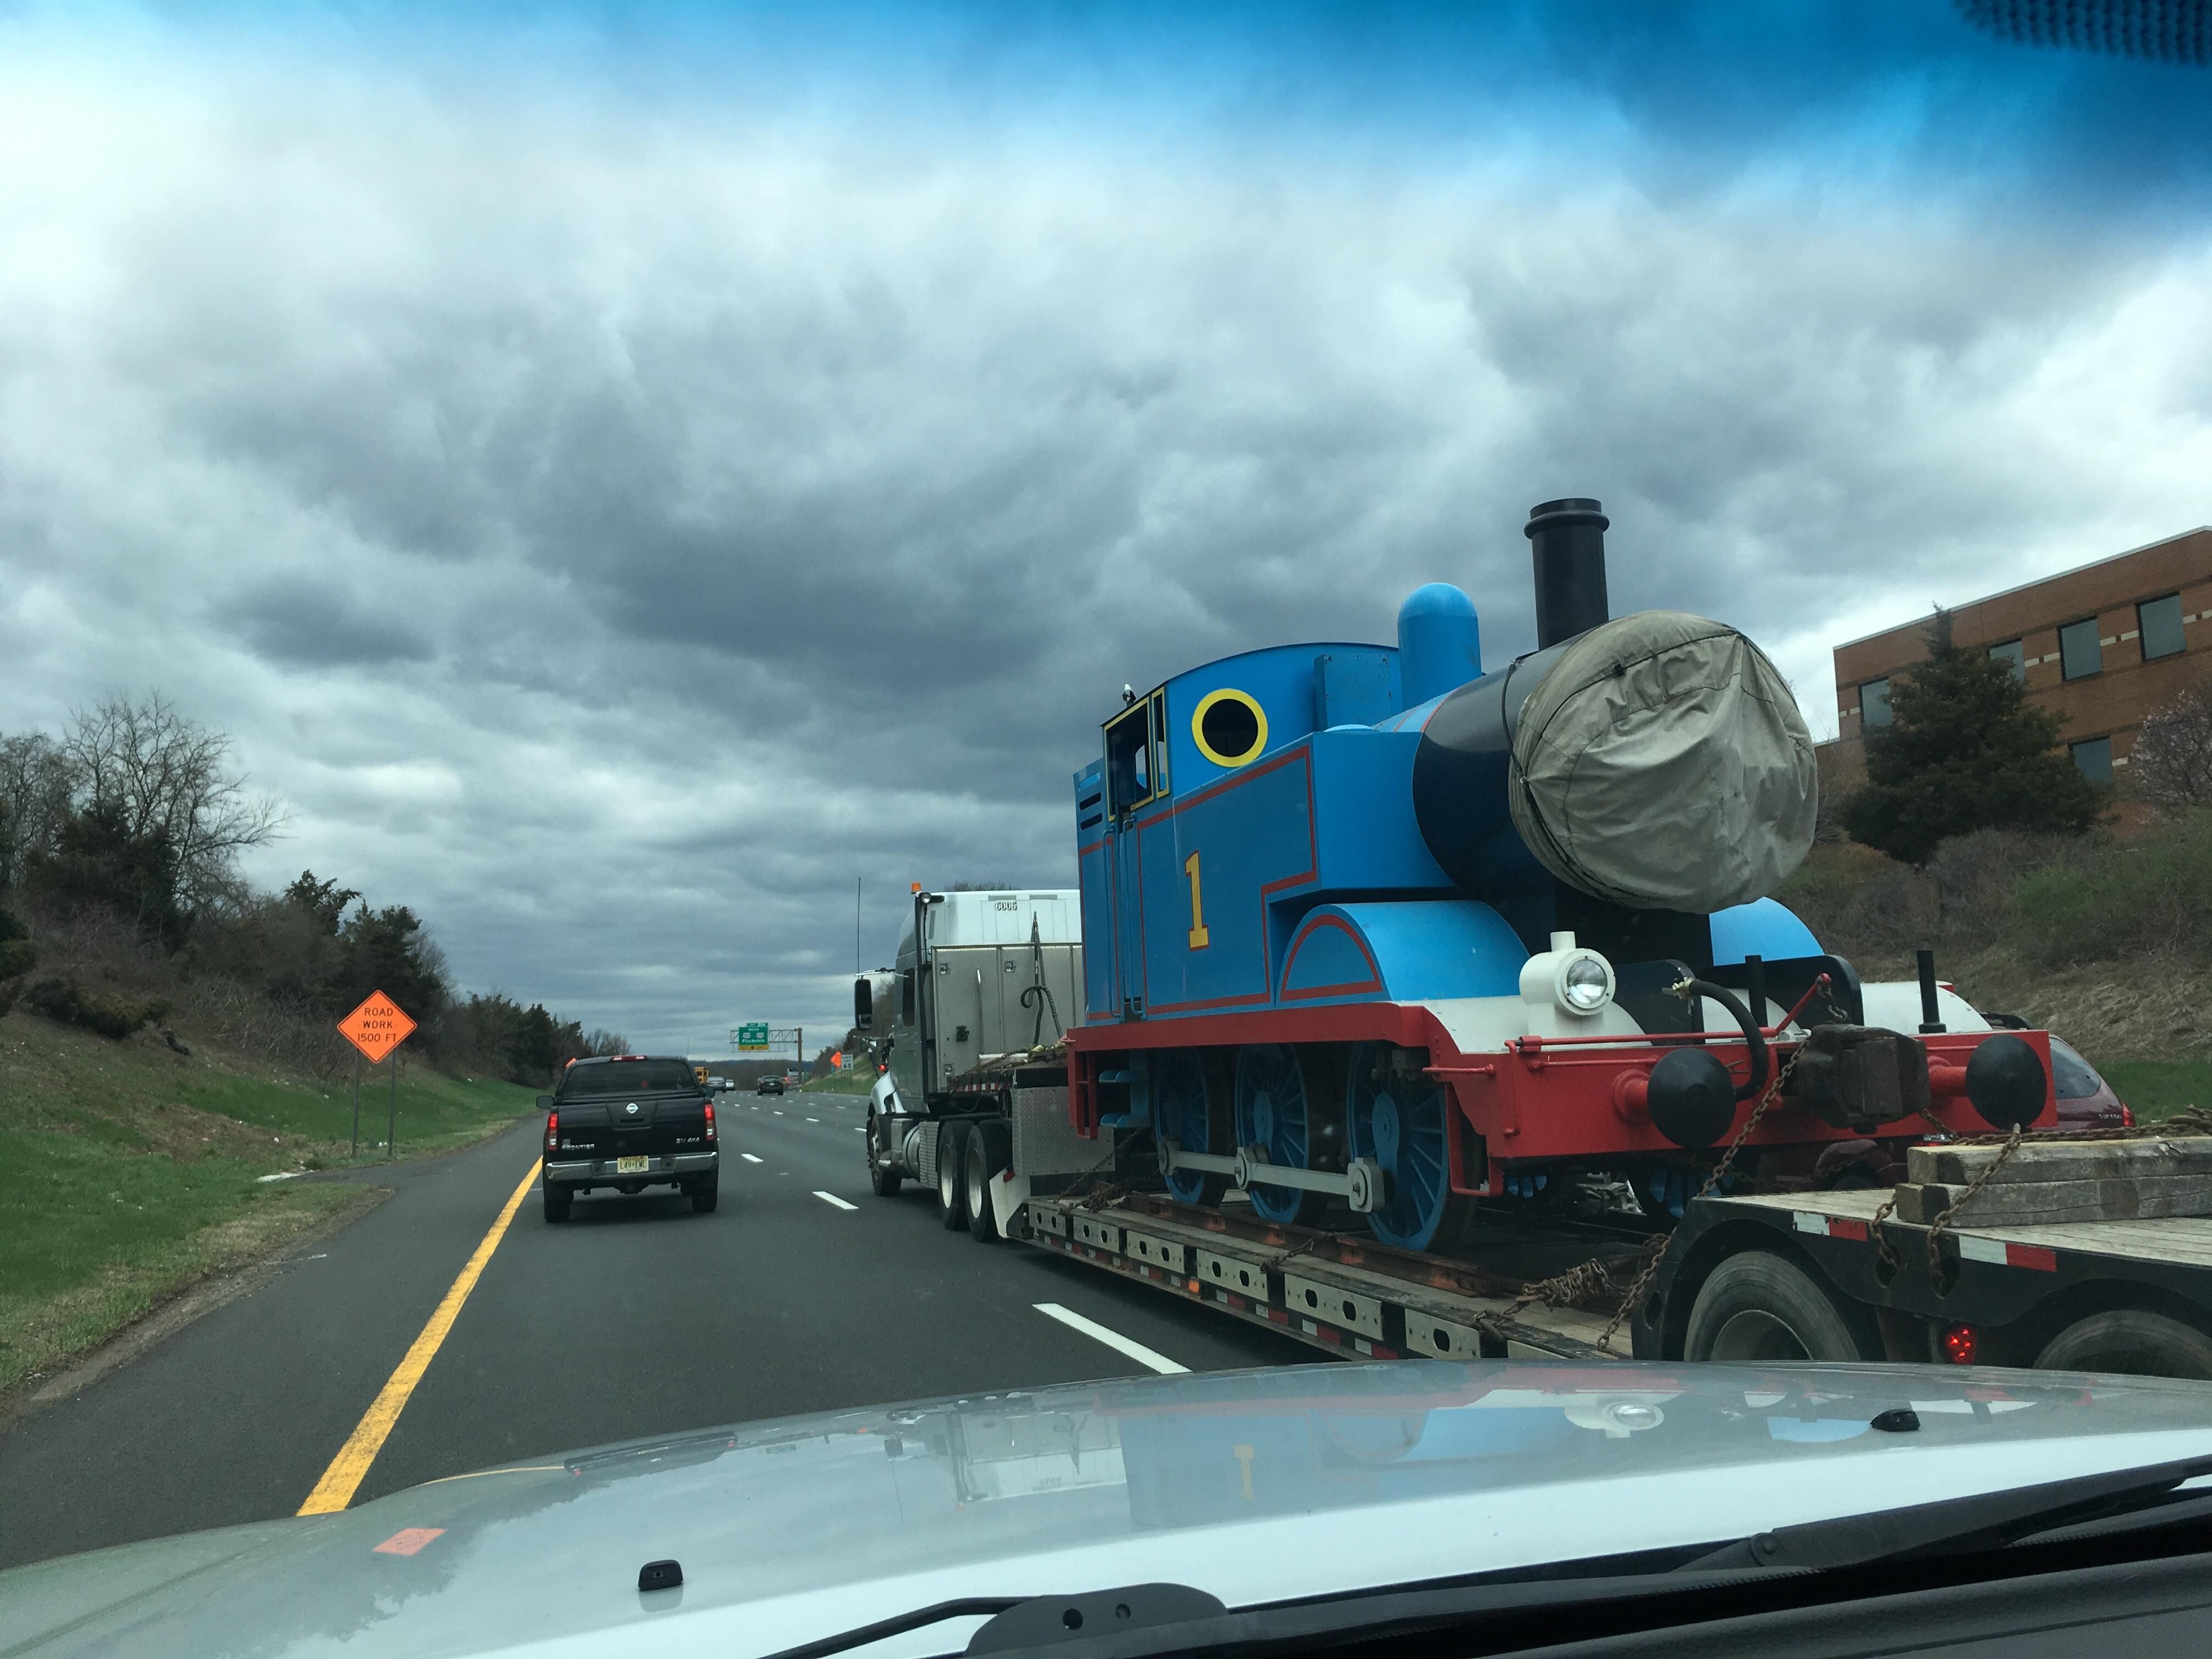 Wha...what are they going to do to Thomas?